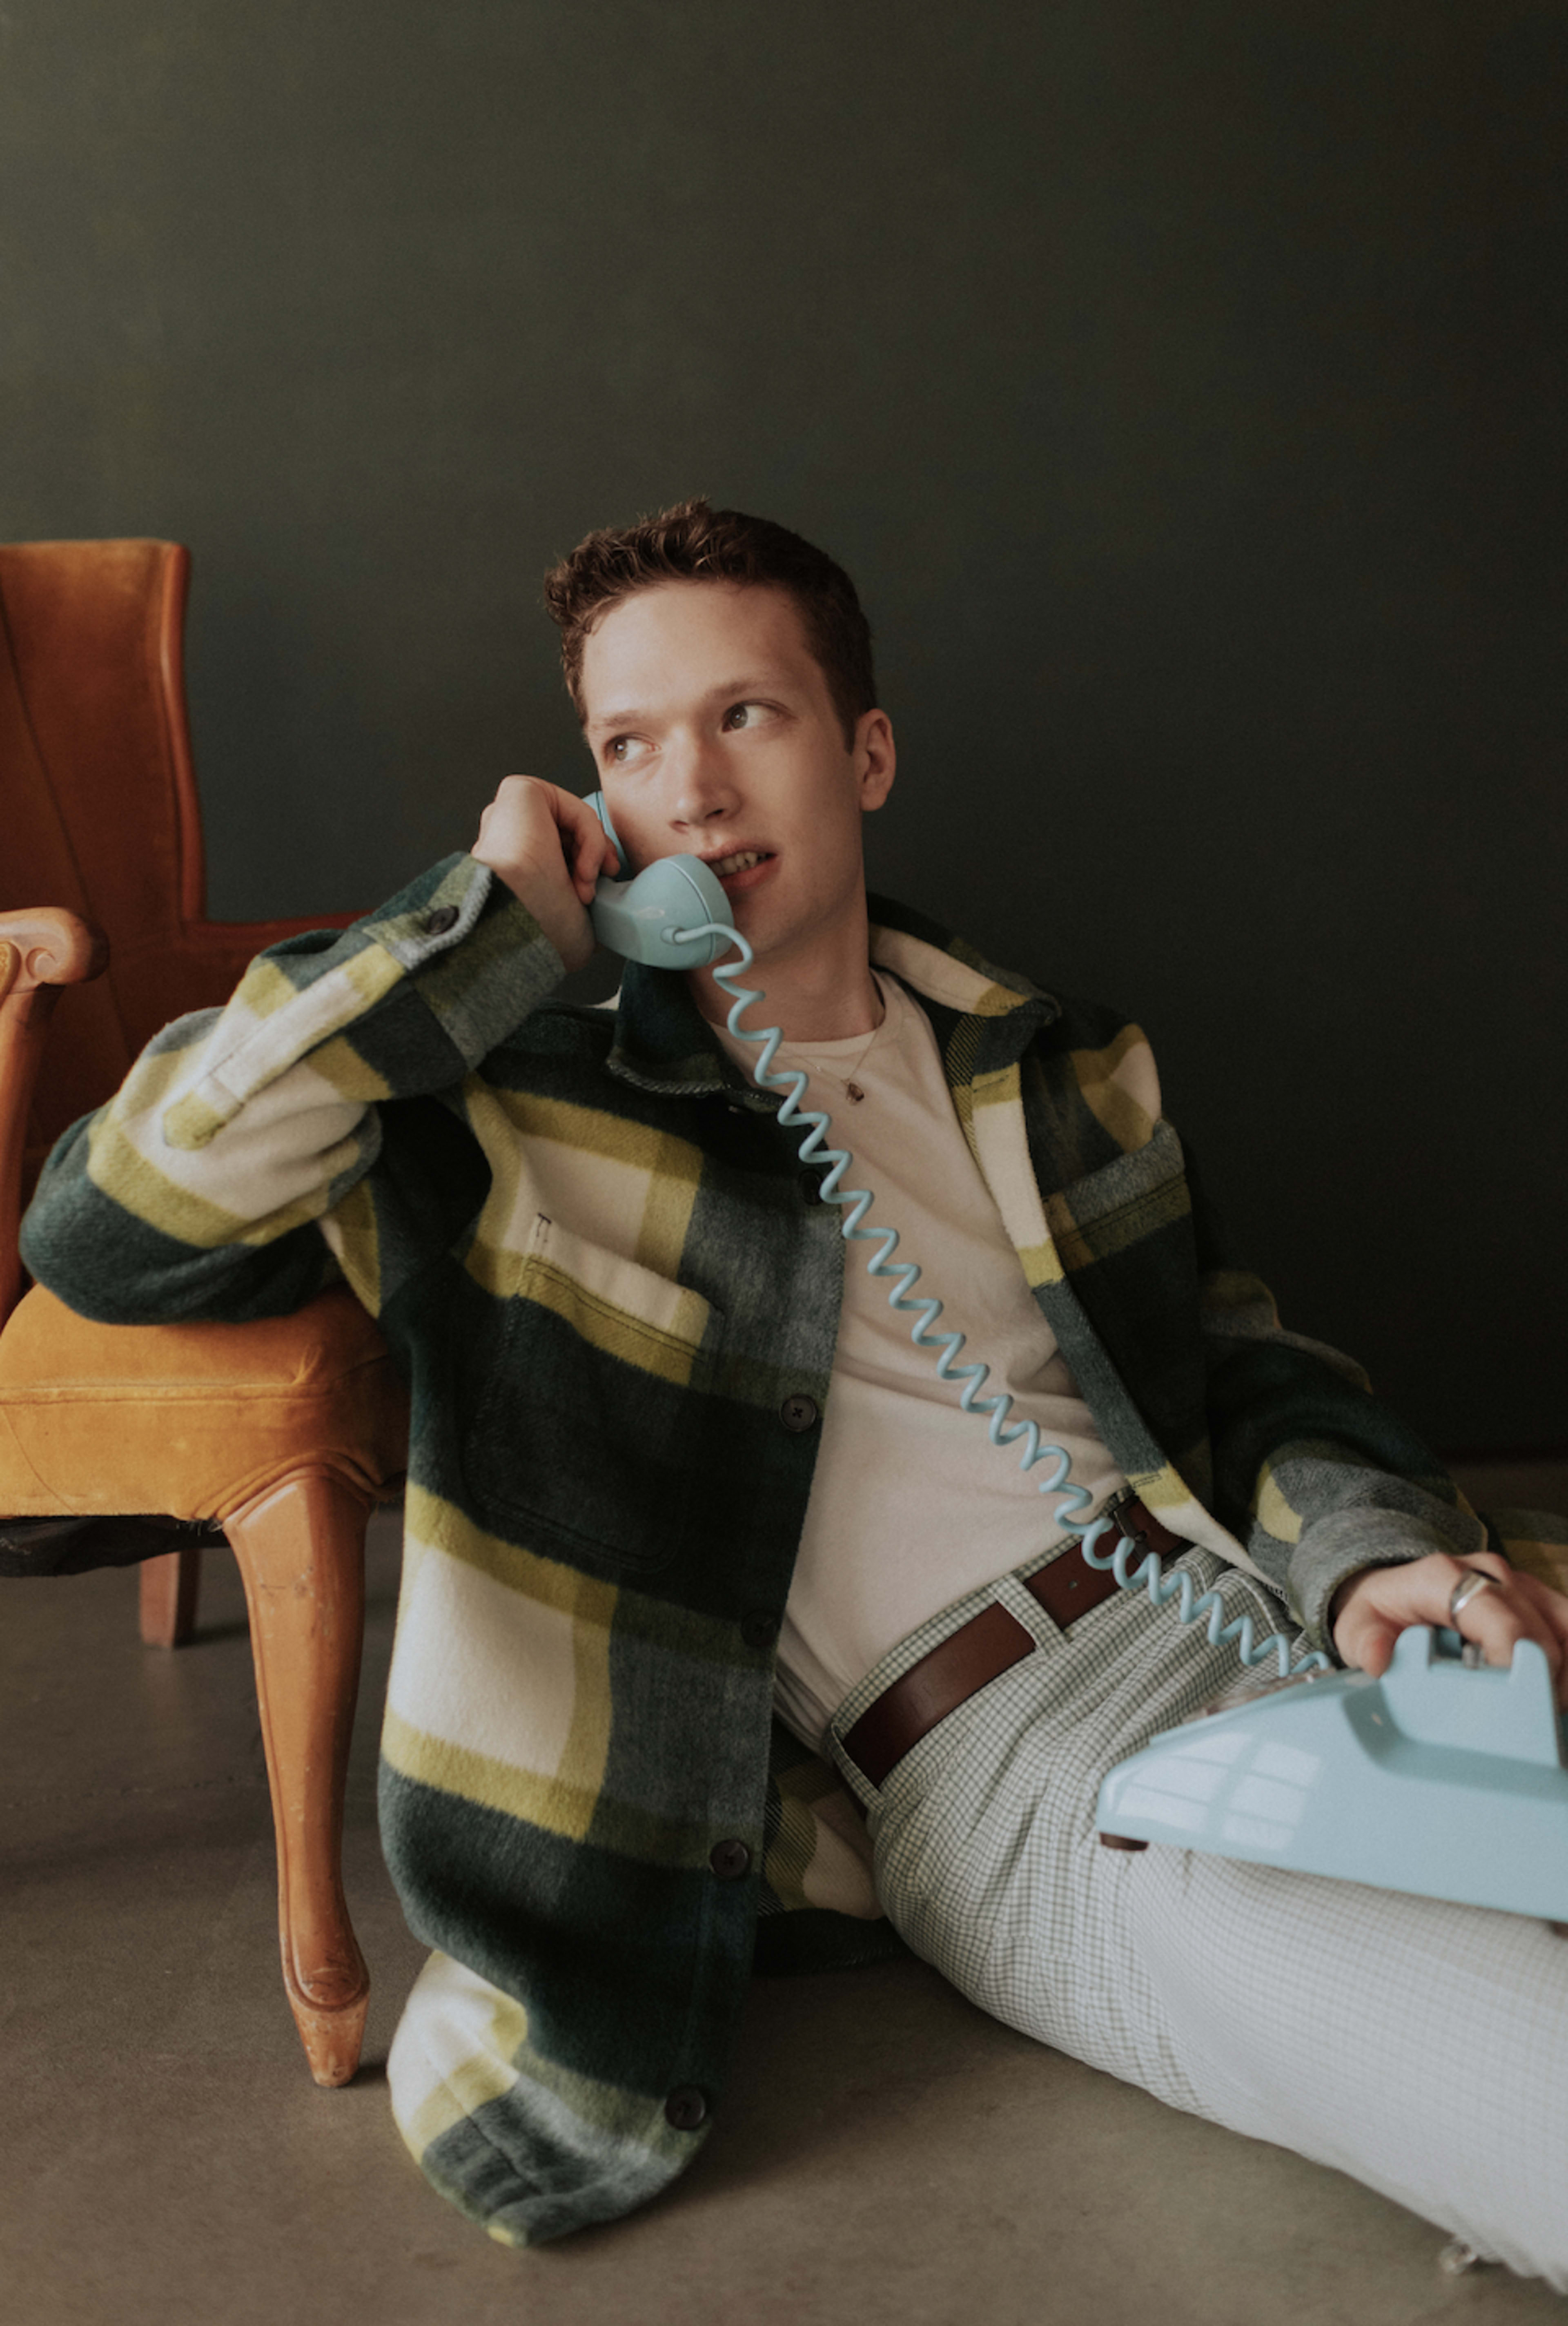 A man poses with a phone for a retro photoshoot.